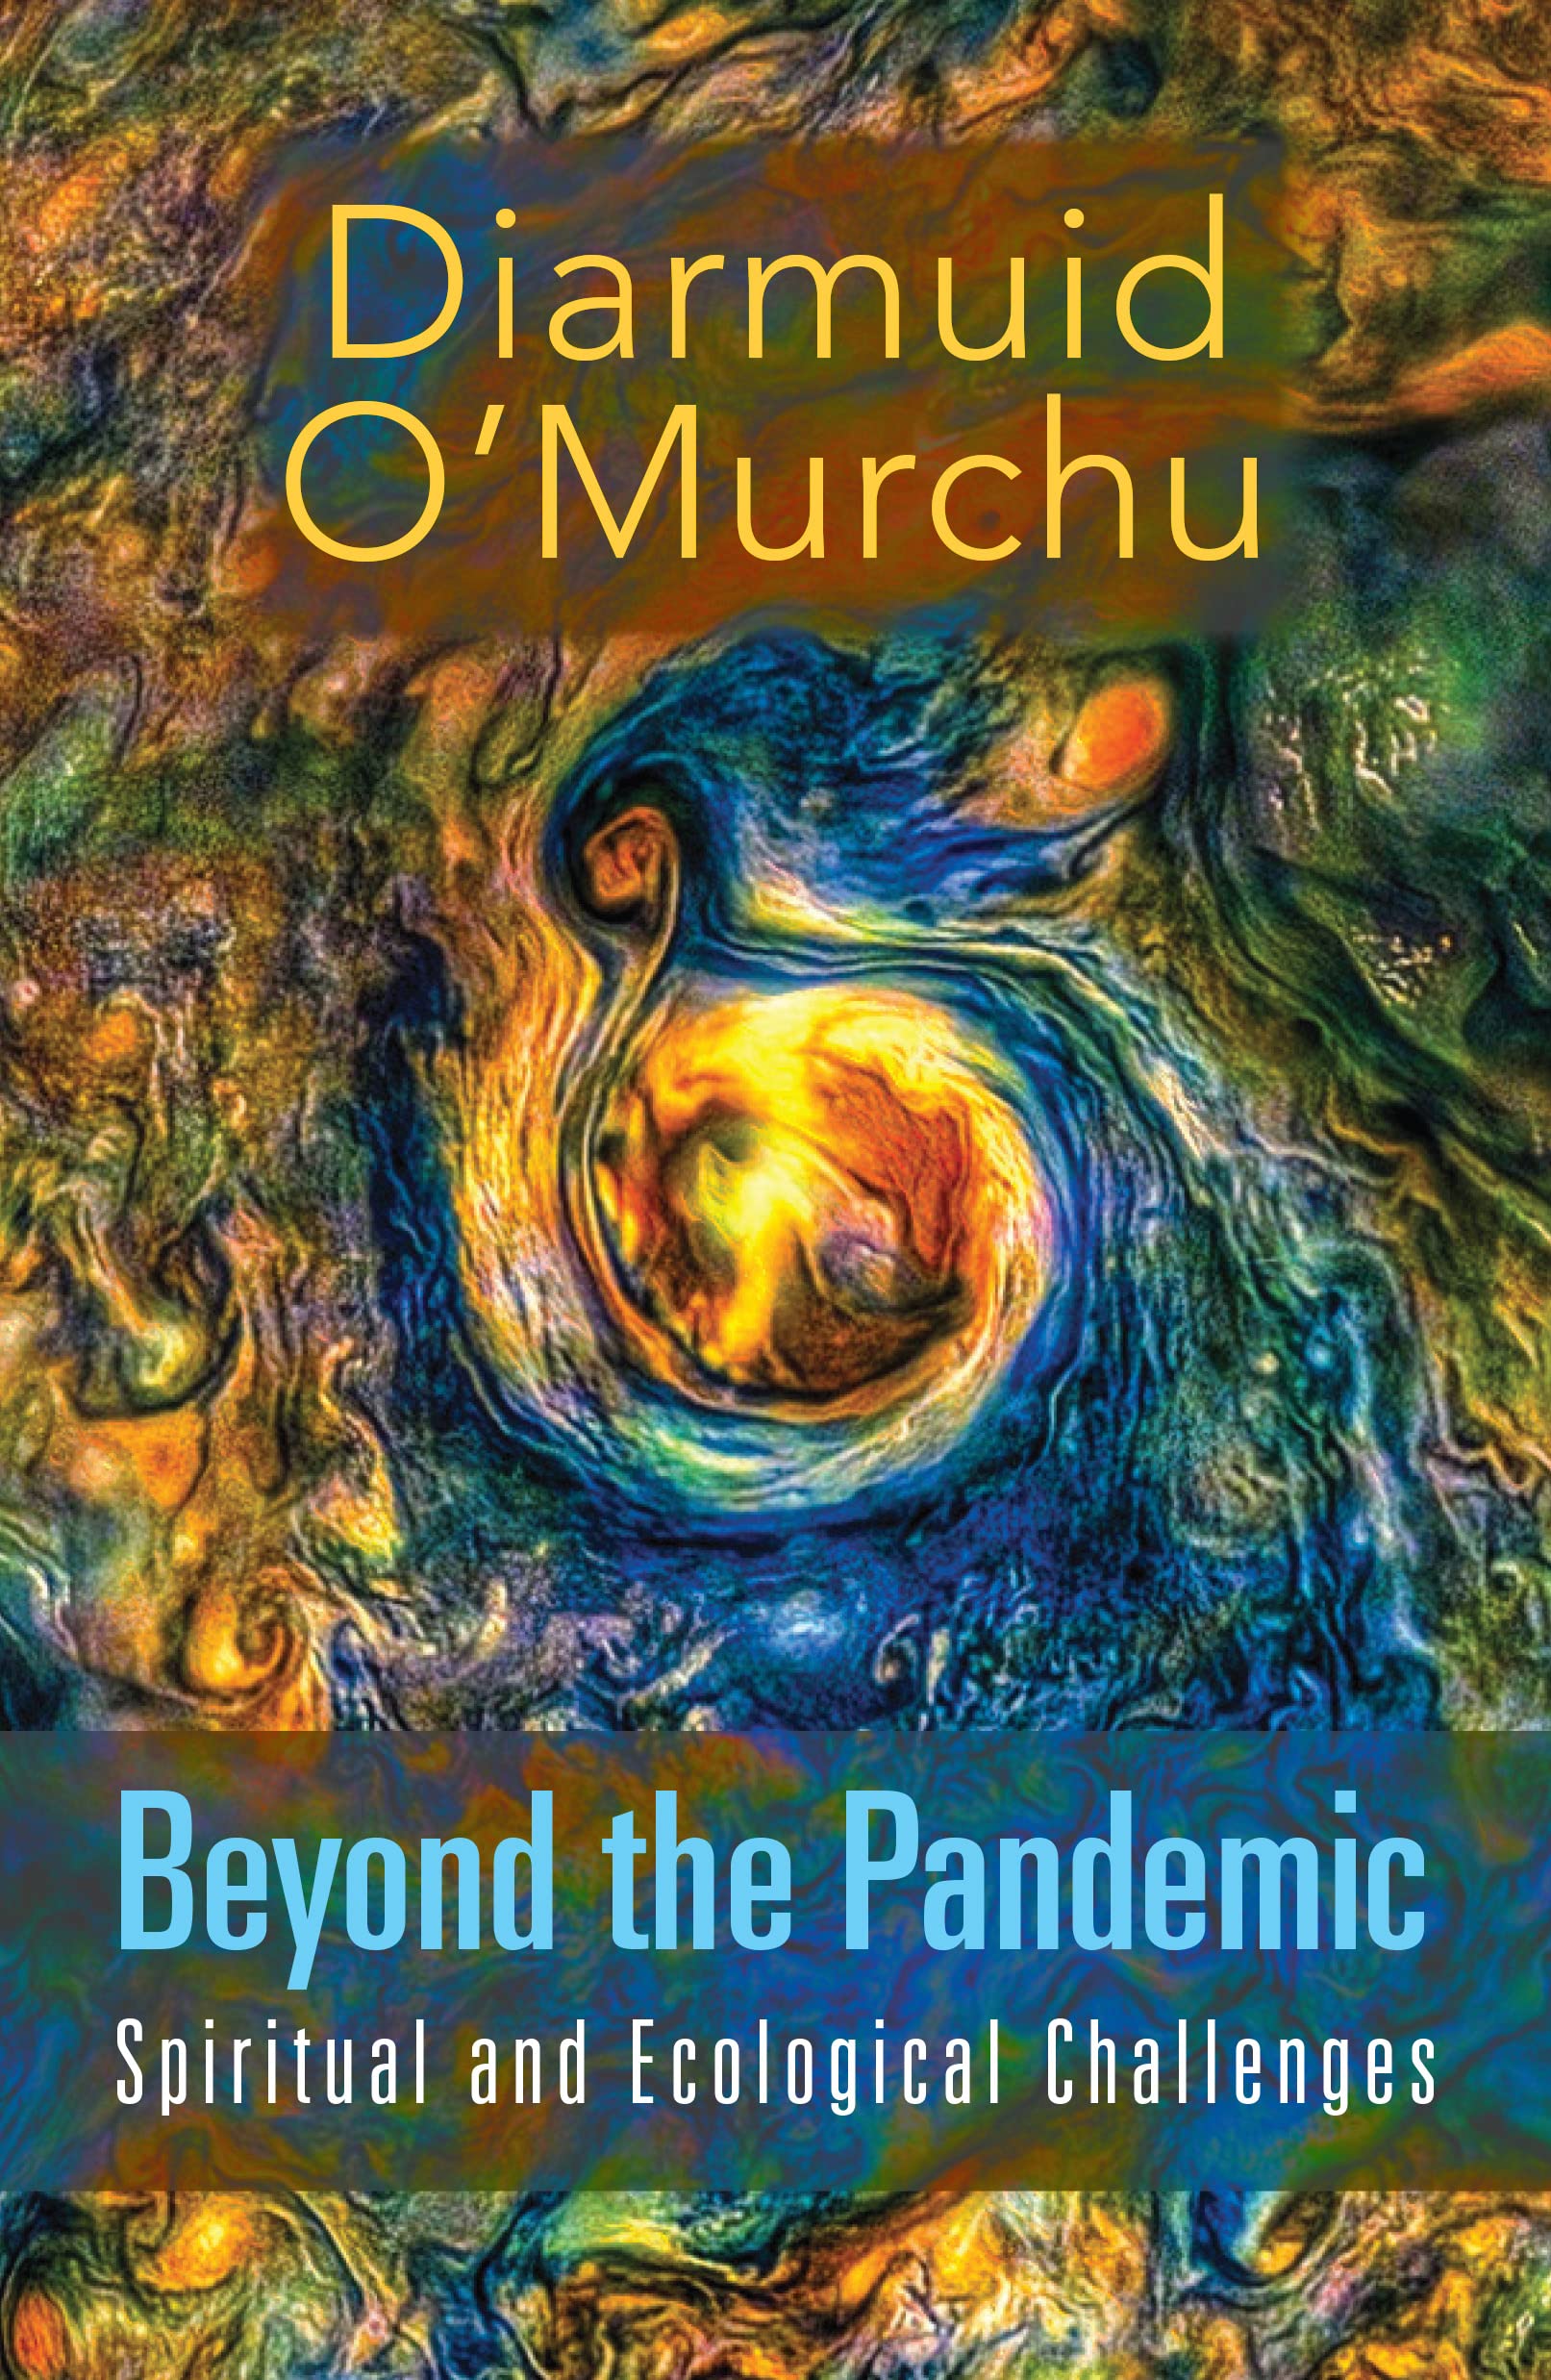 1. Beyond the Pandemic: Spiritual and Ecological Challenges